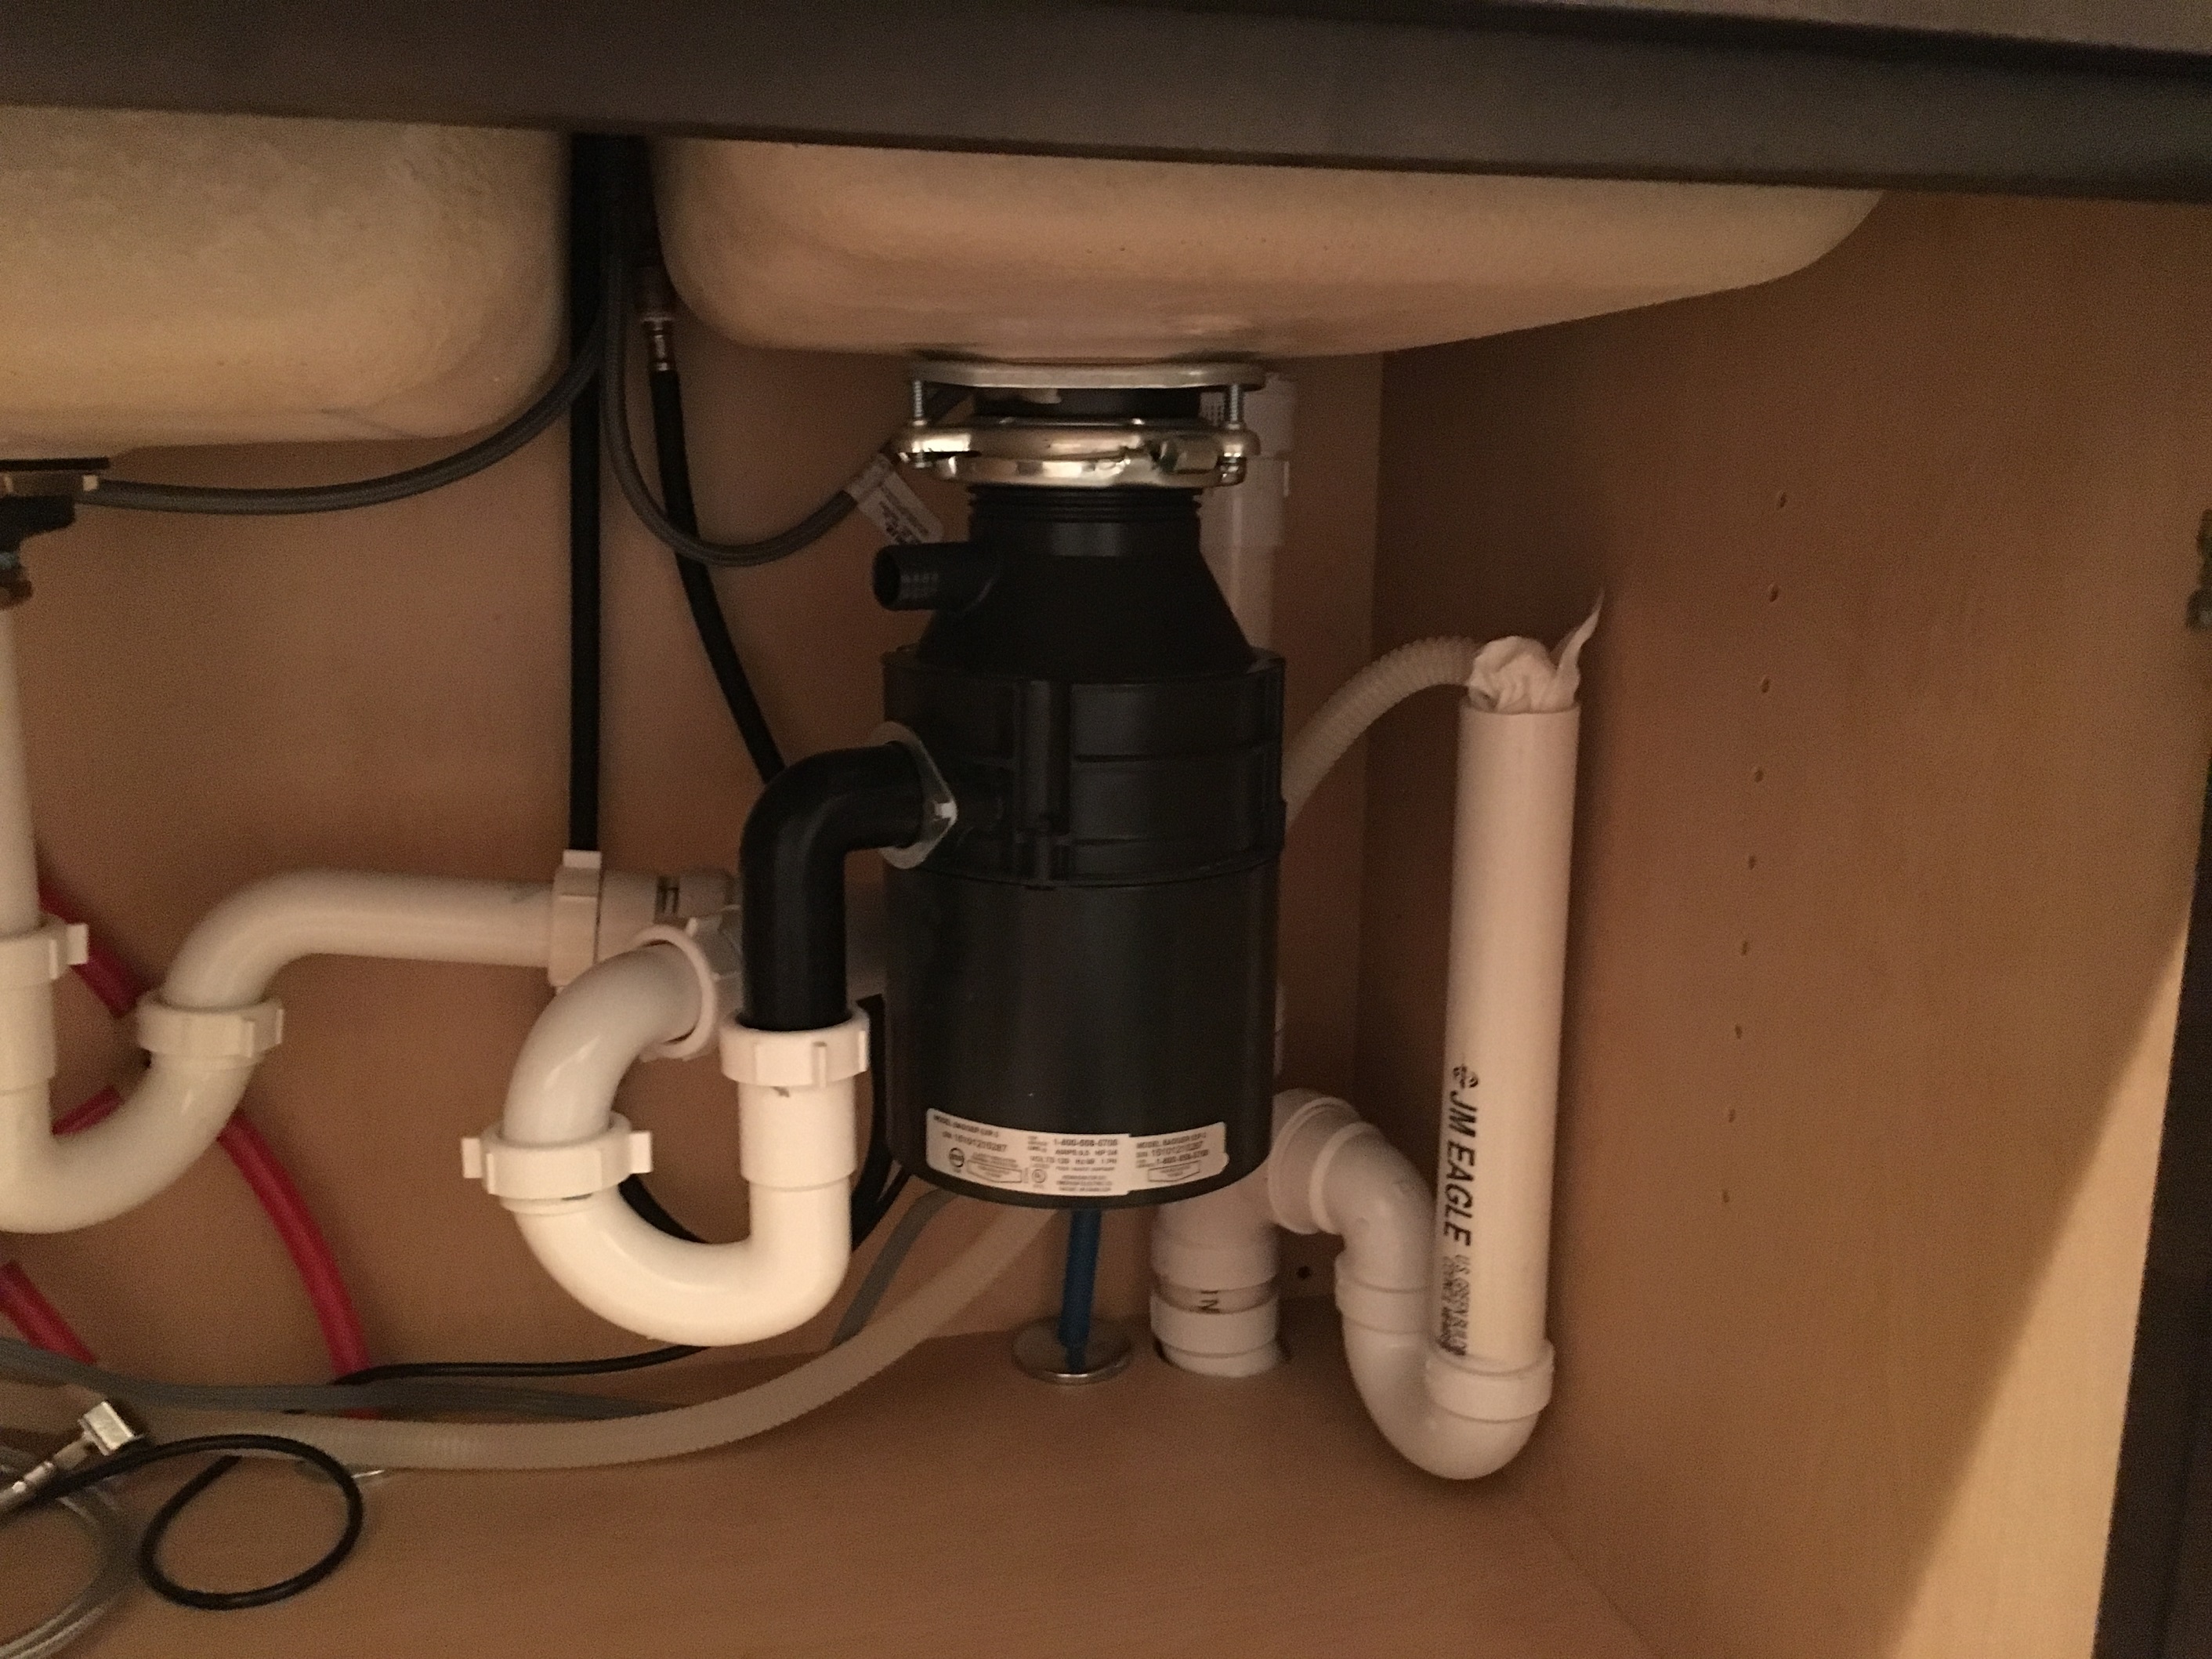 sewer smell coming from kitchen sink